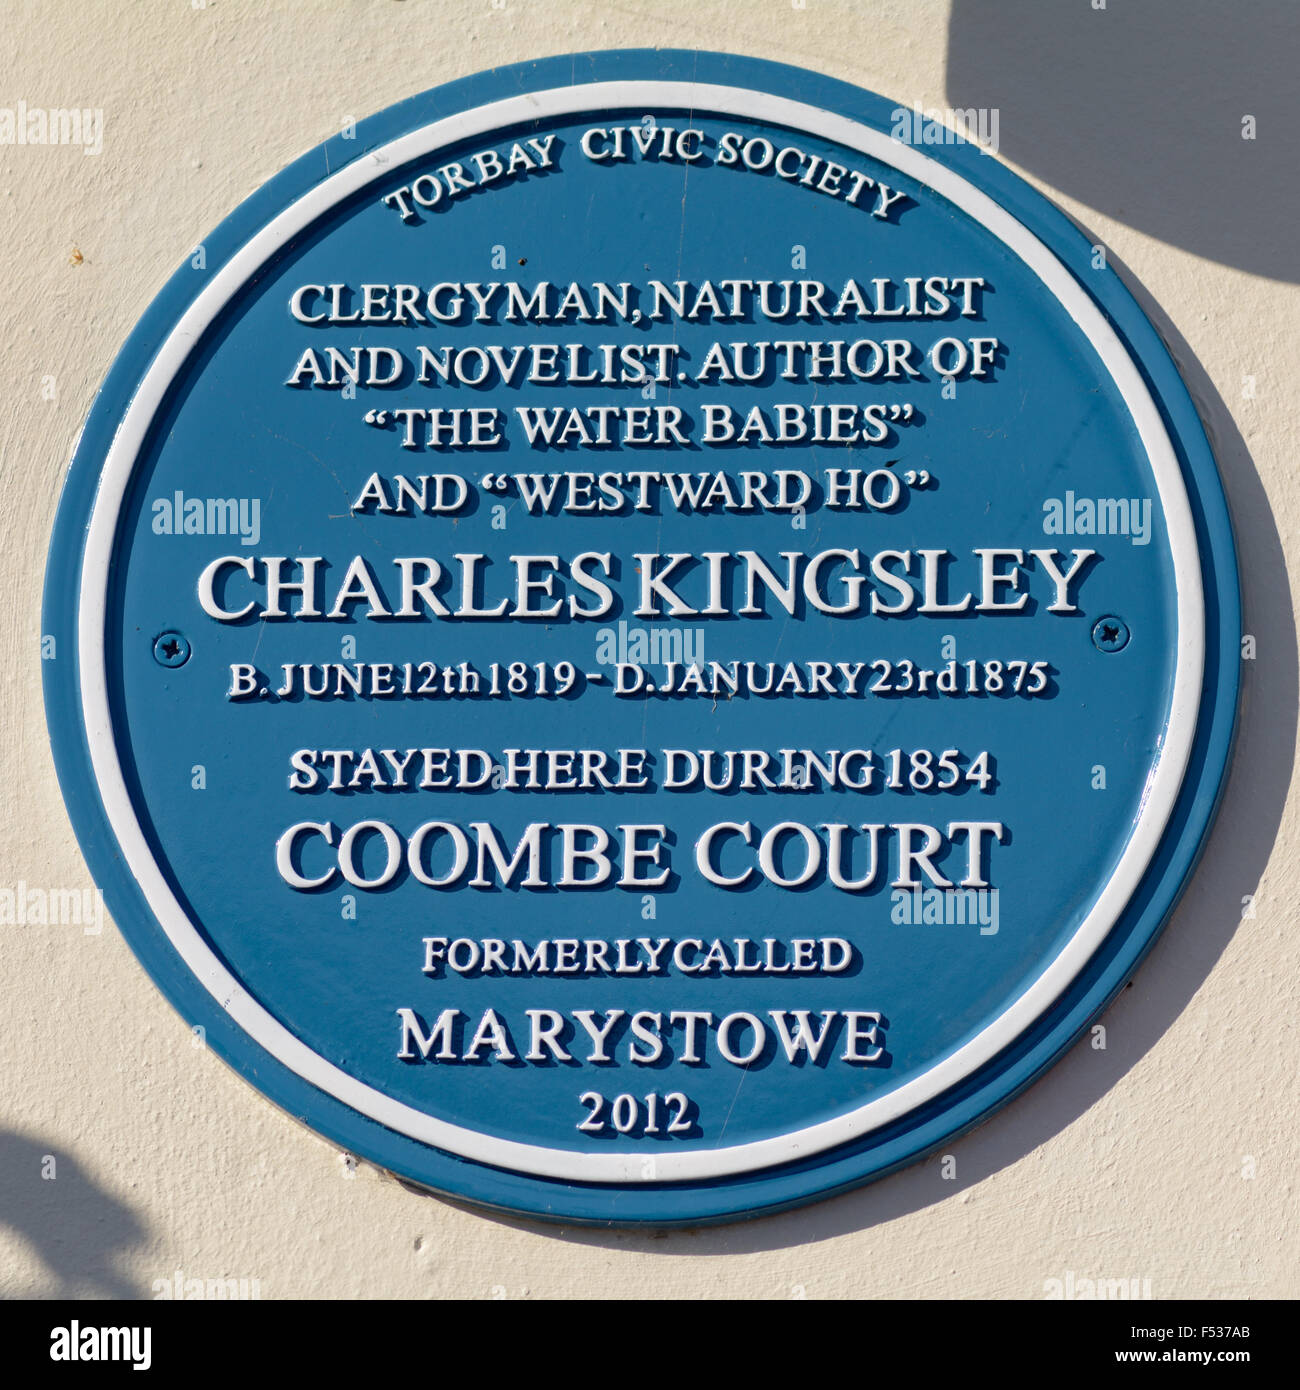 Author, Novelist, Clergyman, Naturalist Charles Kingsley stayed here 1854, English Heritage Blue Plaque sign in Torquay, England Stock Photo